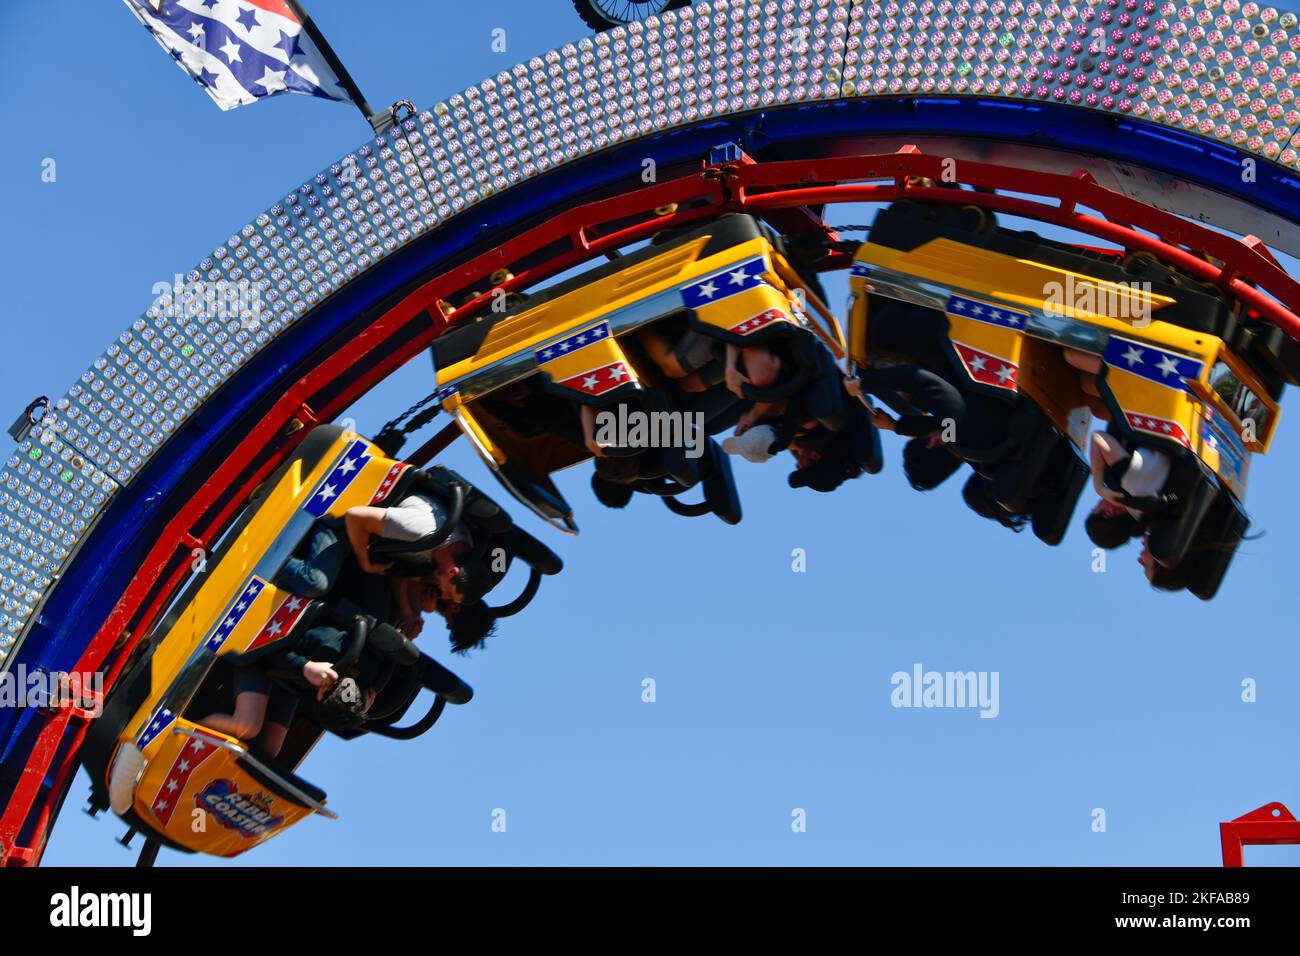 Riding Roller Coaster Upside Down with People The Royal Melbourne Show, Melbourne Victoria VIC, Australia Stock Photo